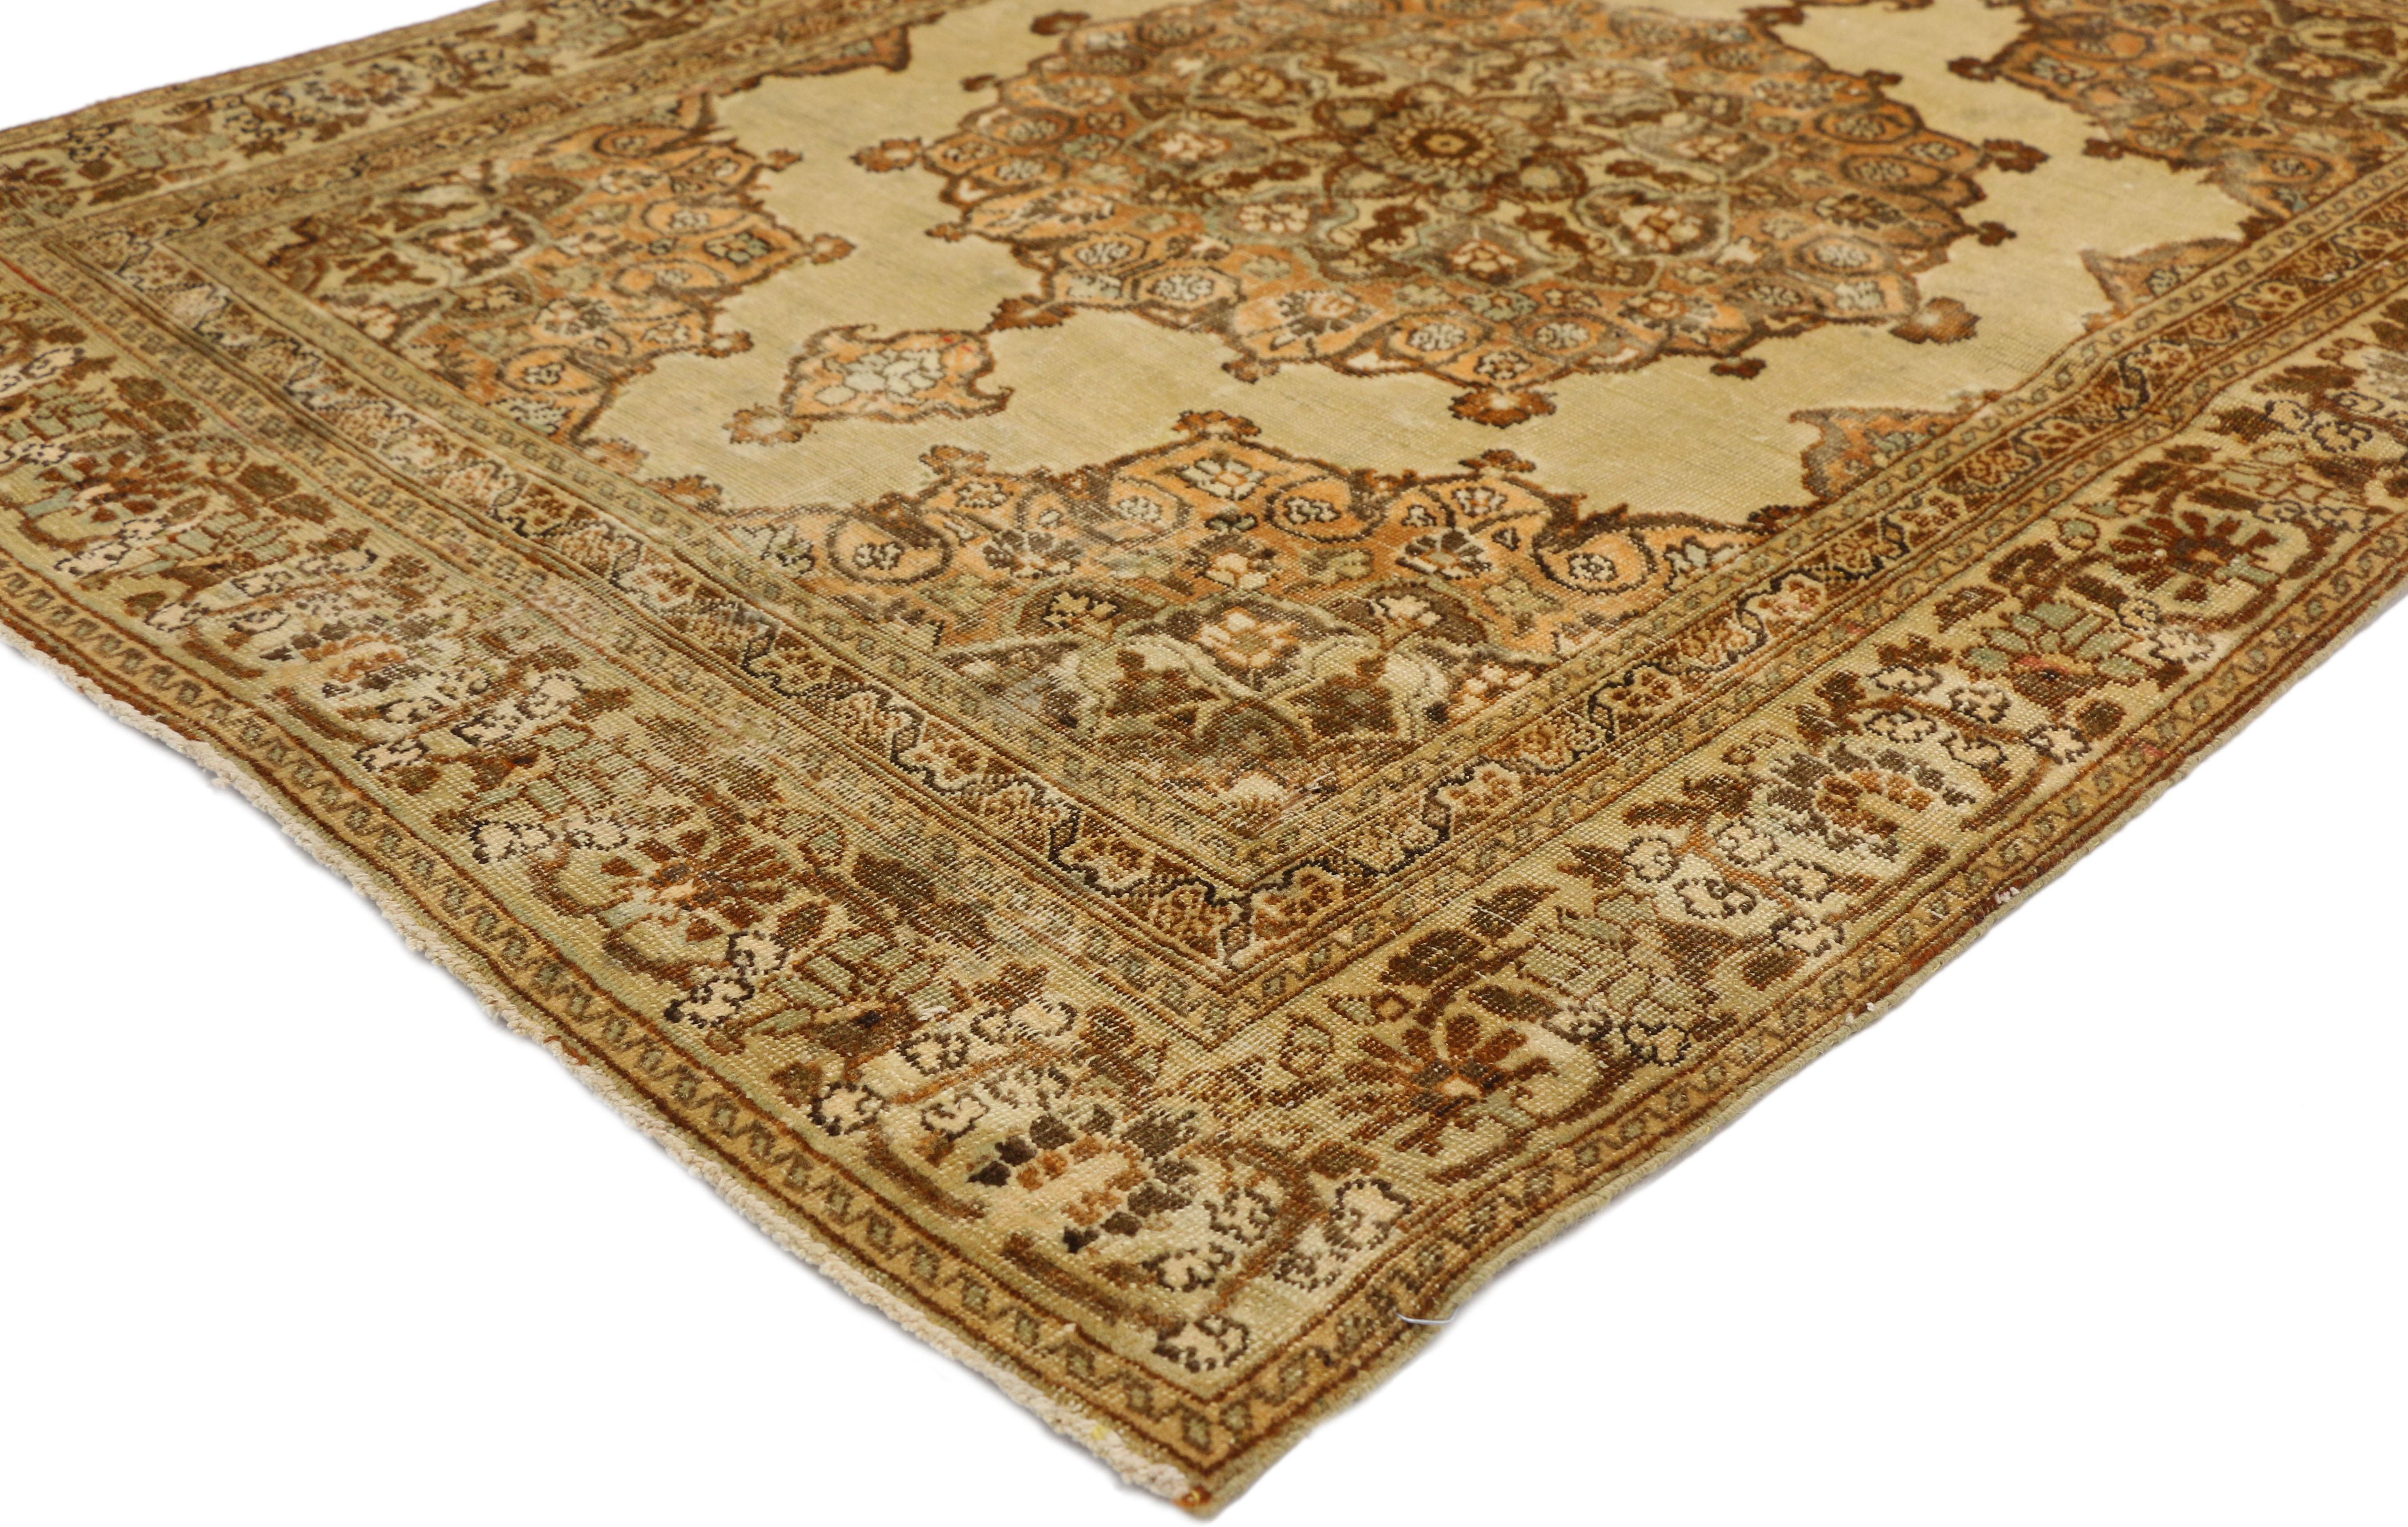 51173 Distressed vintage Persian Tabriz Accent rug with rustic Tuscan style, kitchen, Foyer or entry rug. This hand knotted wool distressed vintage Persian Tabriz rug beautifully showcases a rustic Tuscan style. It features a round center medallion